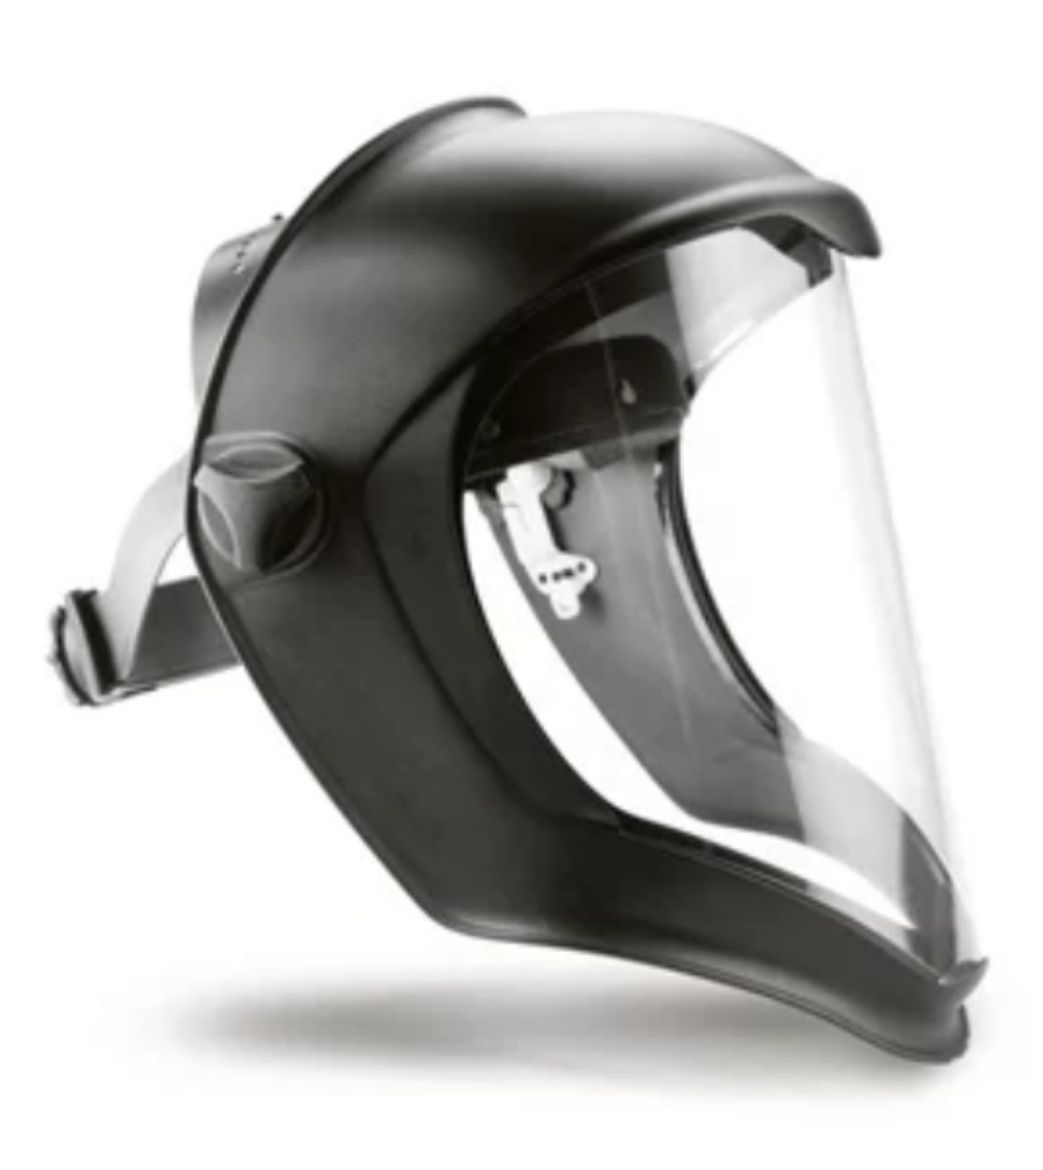 Picture of 1011627 - BIONIC REPLACEMENT VISOR, CLEAR, ABRASION RESISTANT / ANTI-FOG